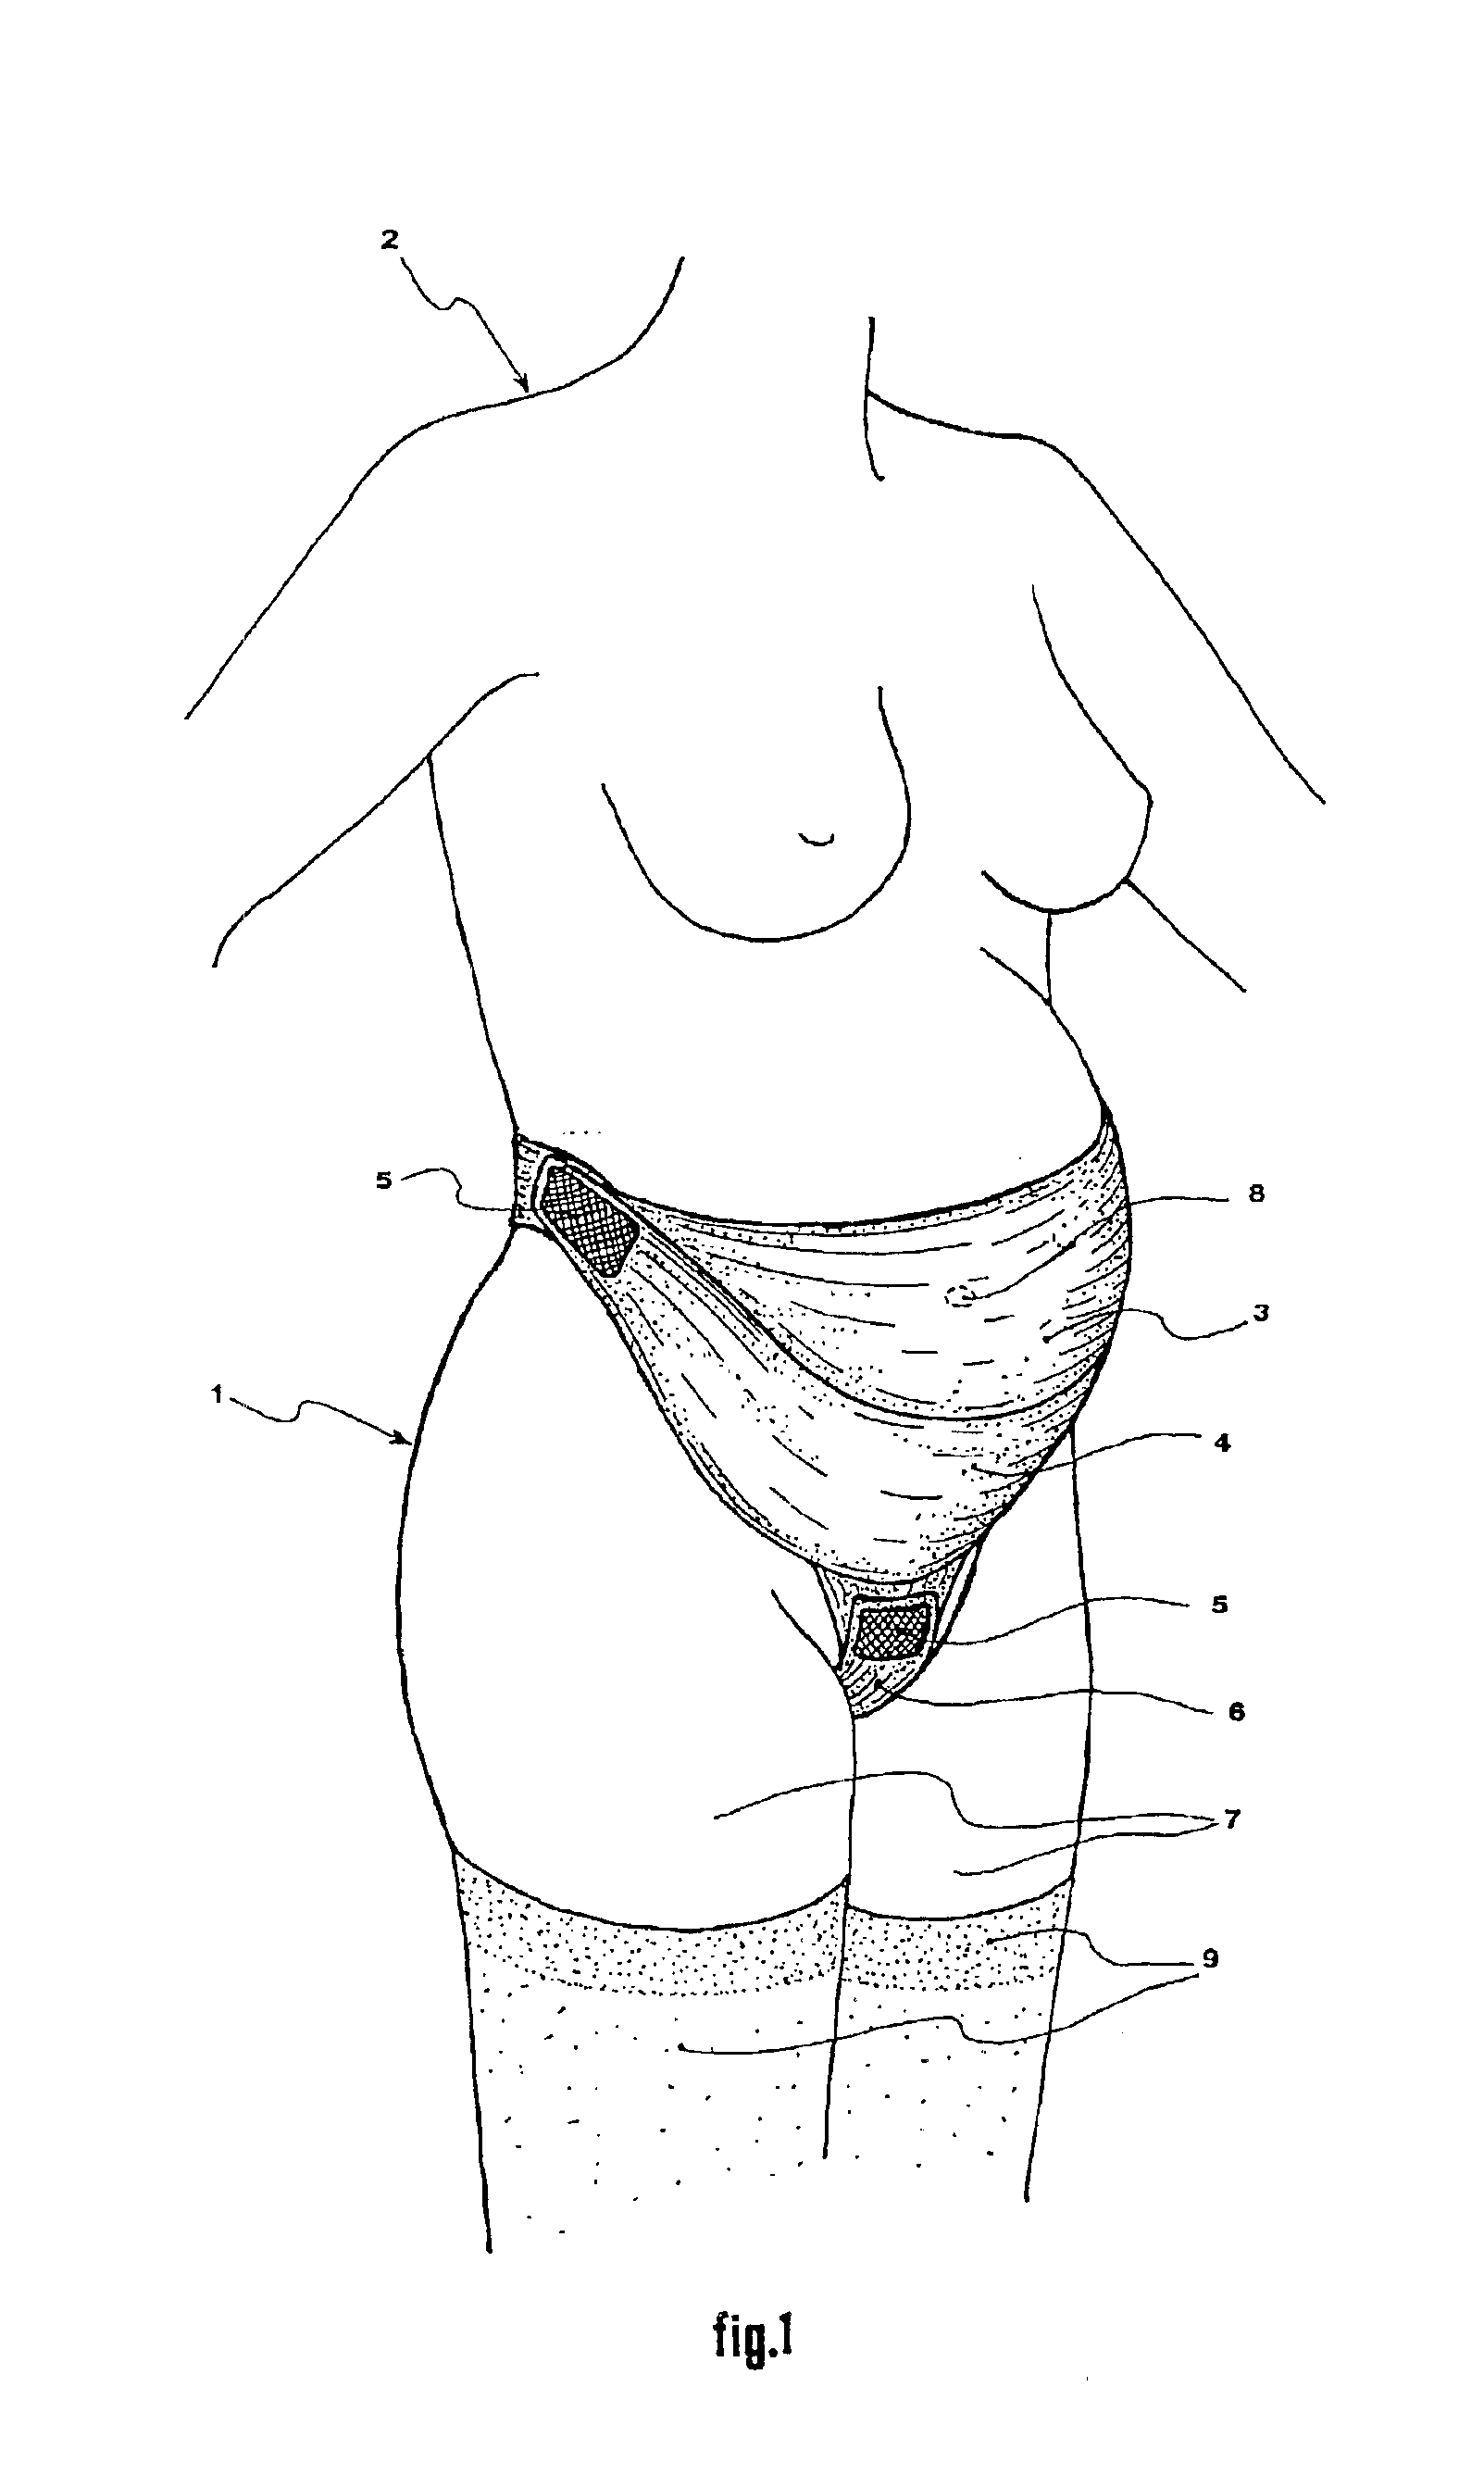 Structure for supporting body parts of the human body